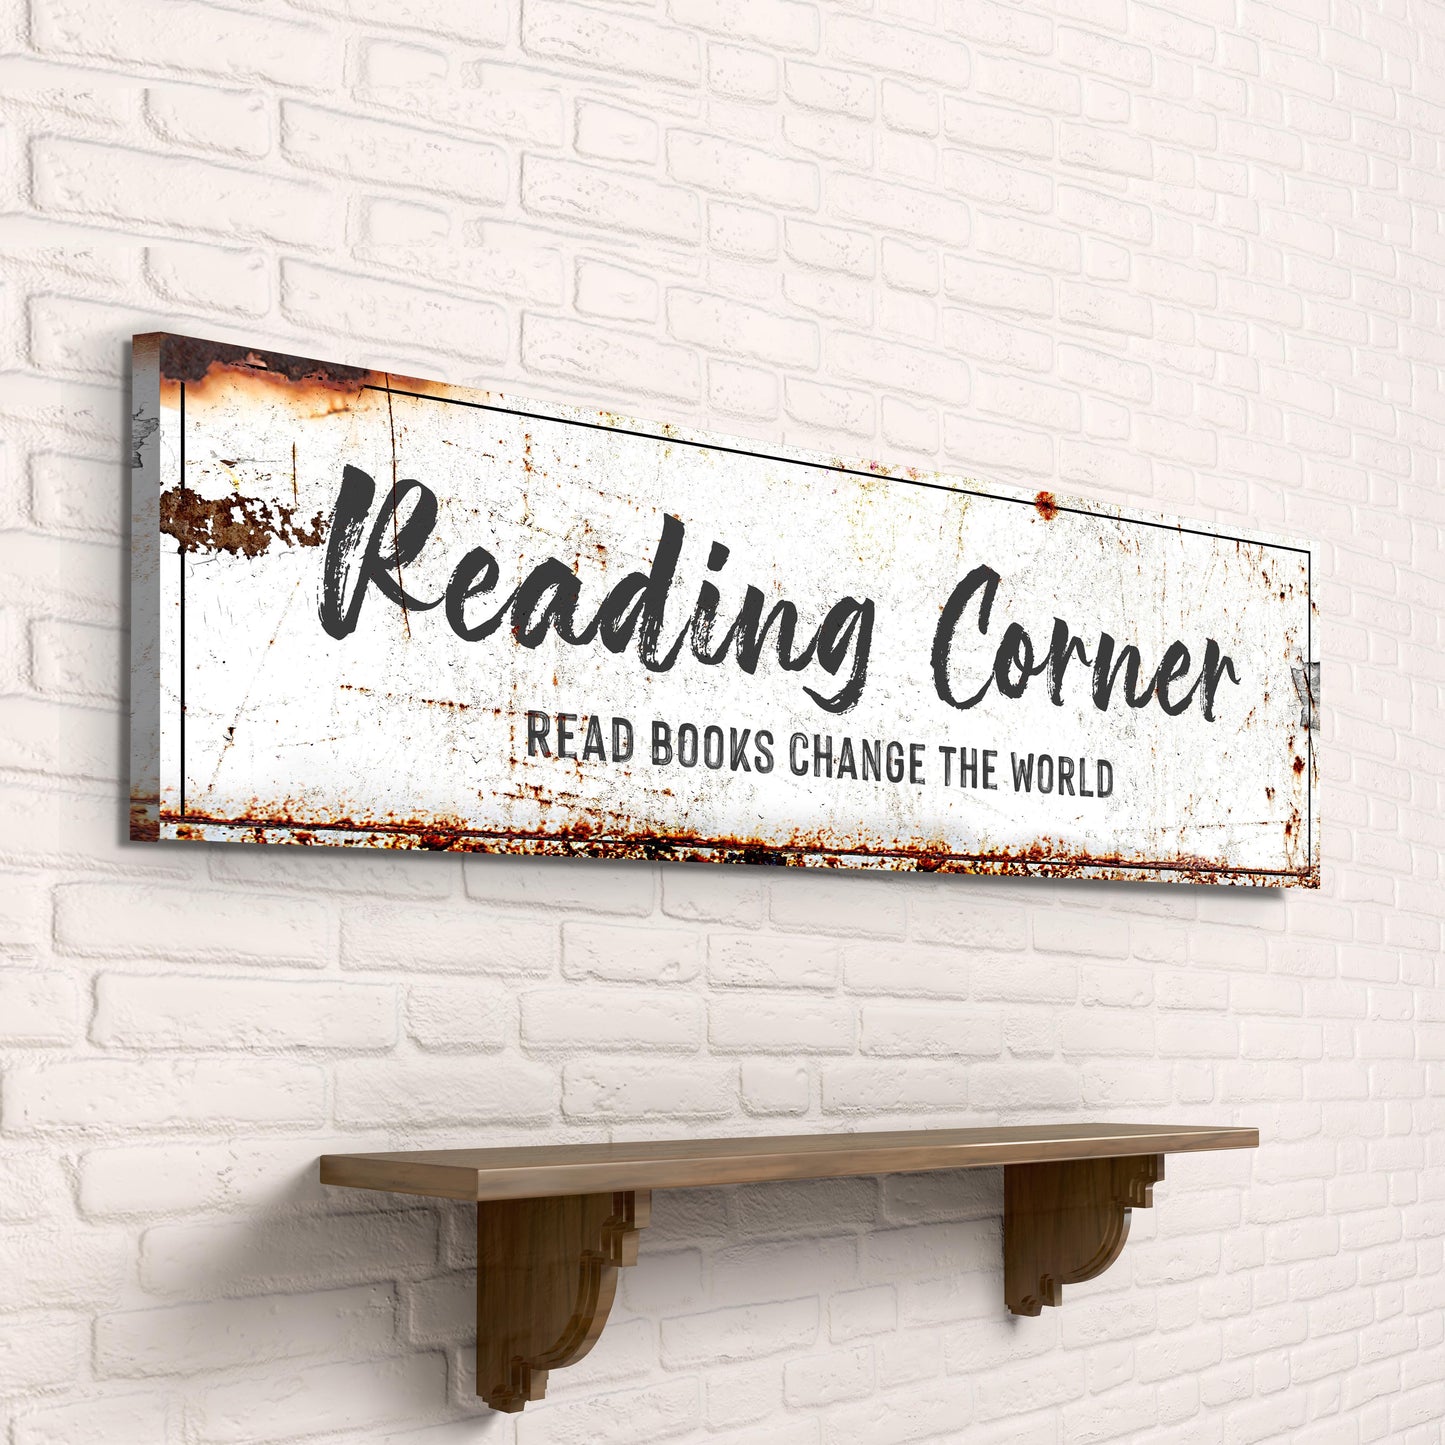 Reading Corner Sign - Image by Tailored Canvases